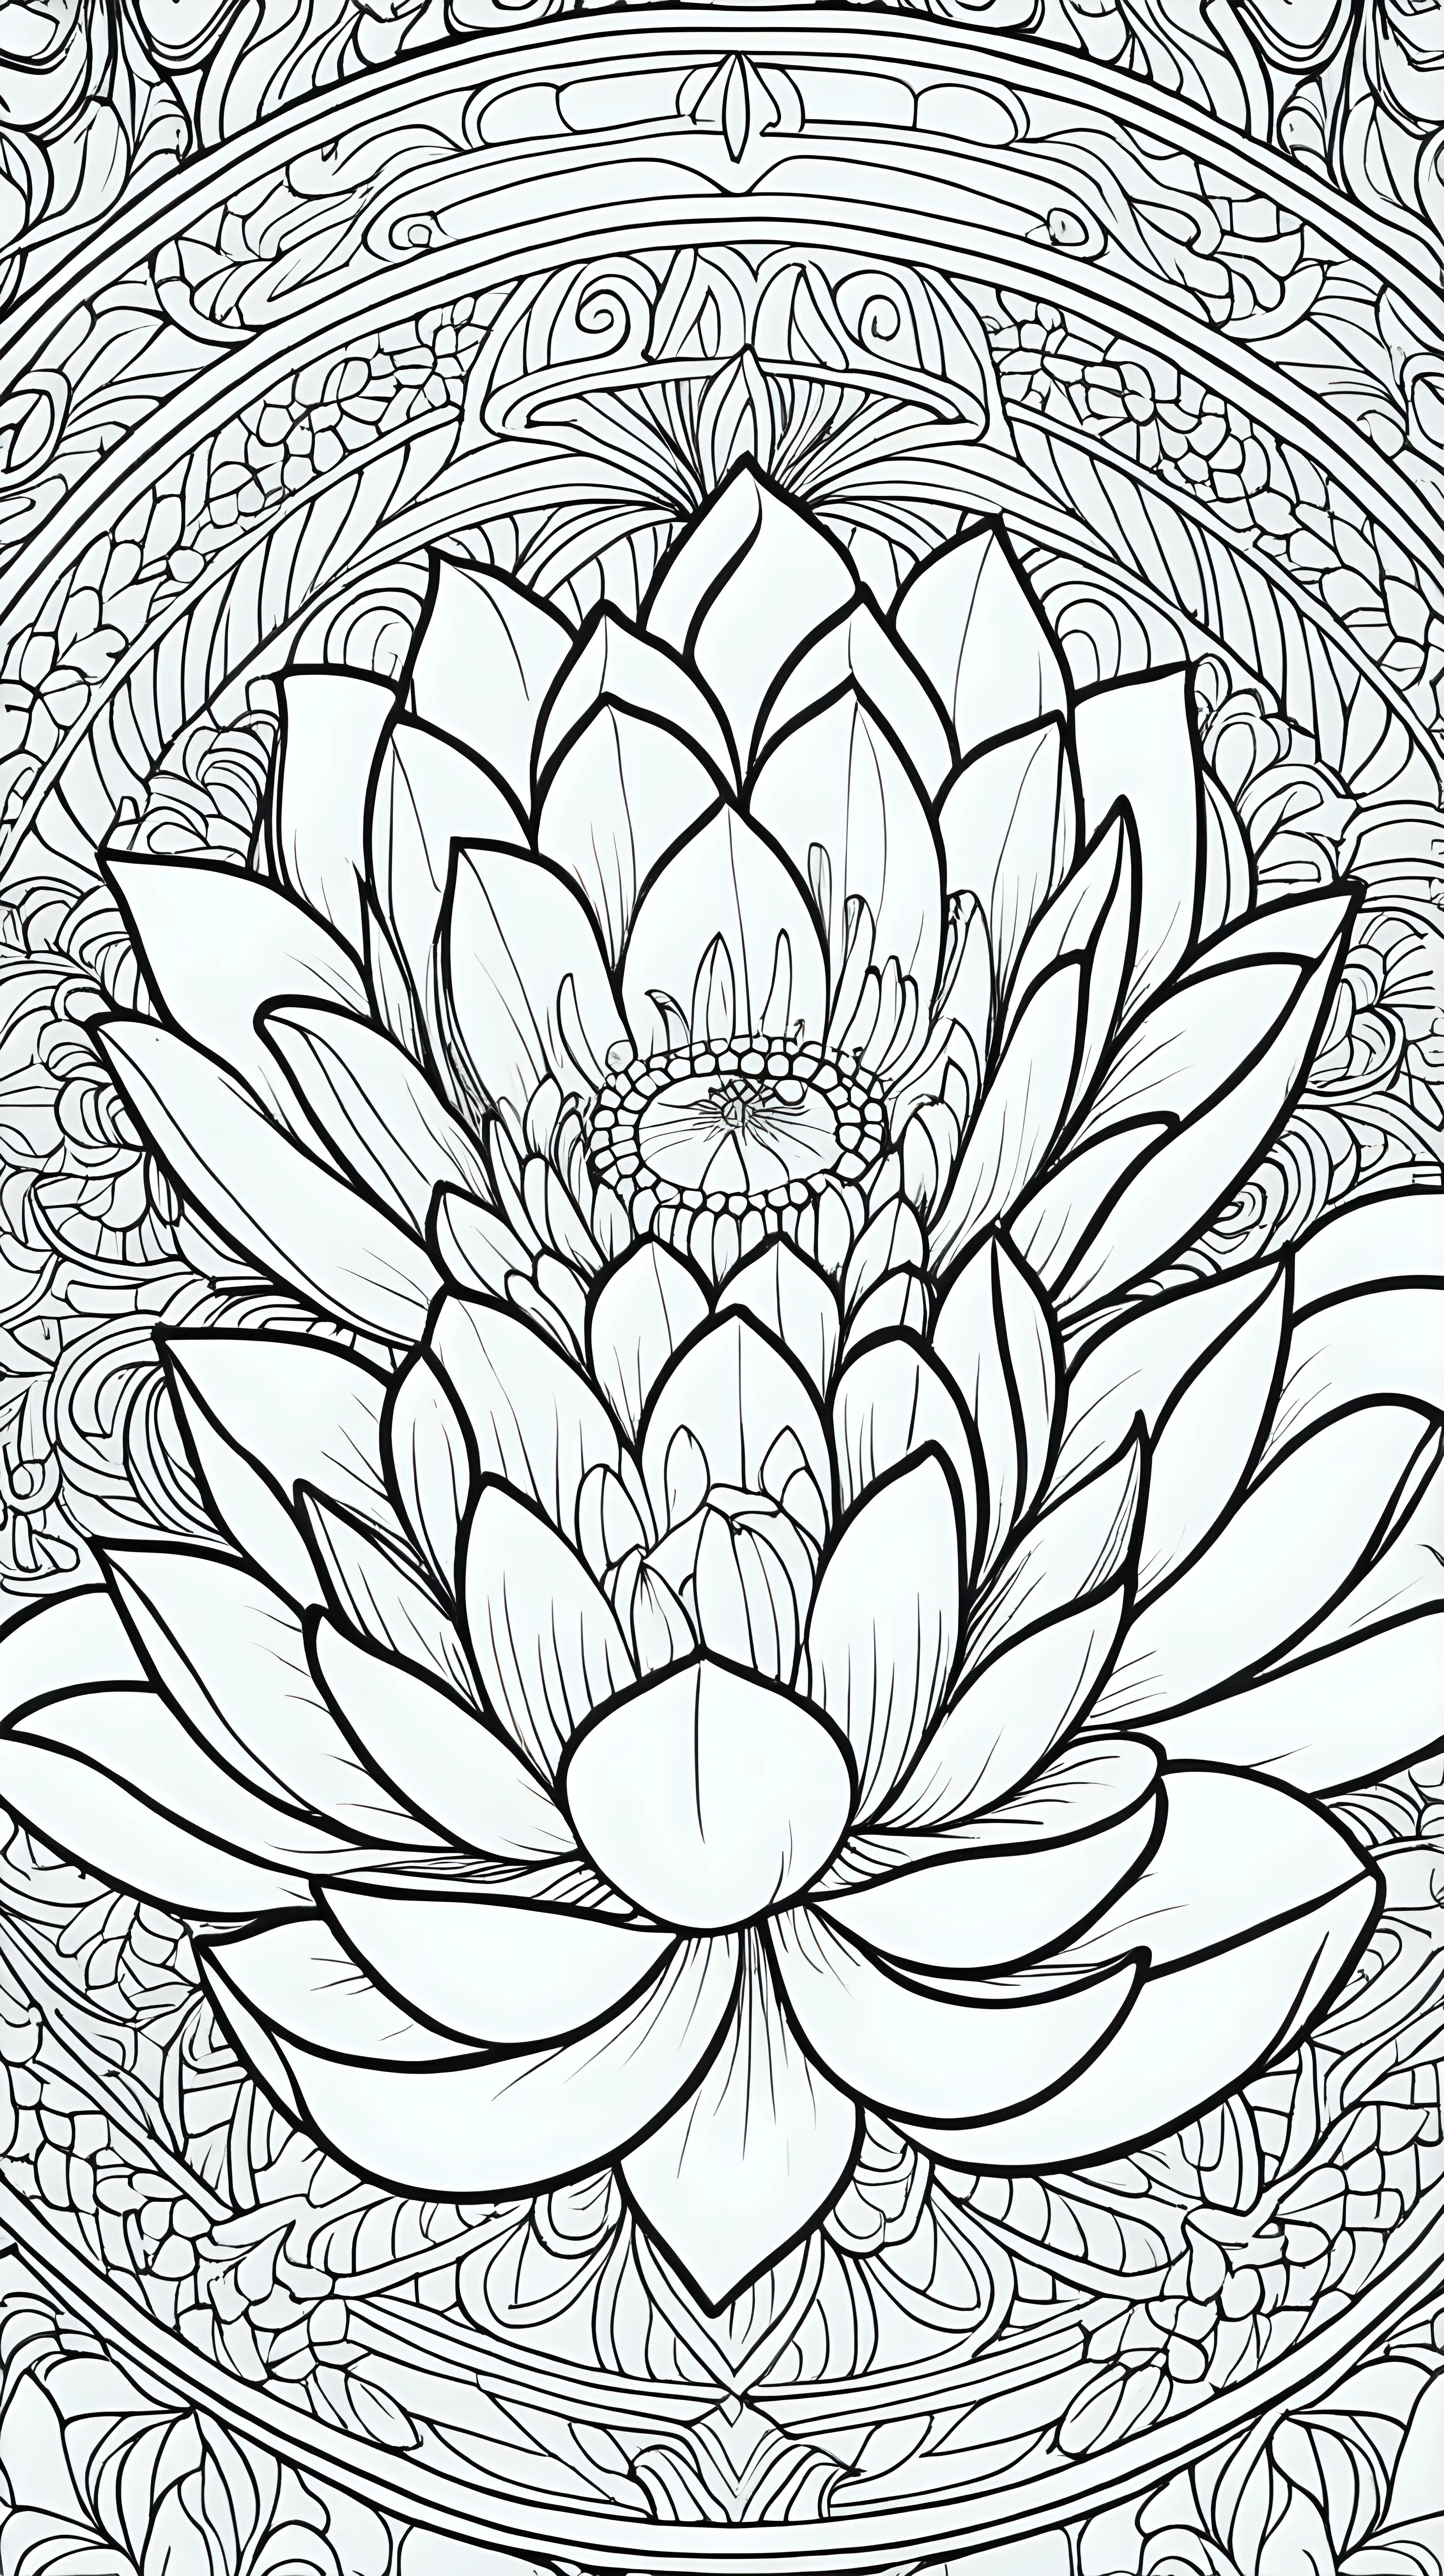 Mandala Lotus Coloring Book Intricate Floral Patterns for Mindful Relaxation